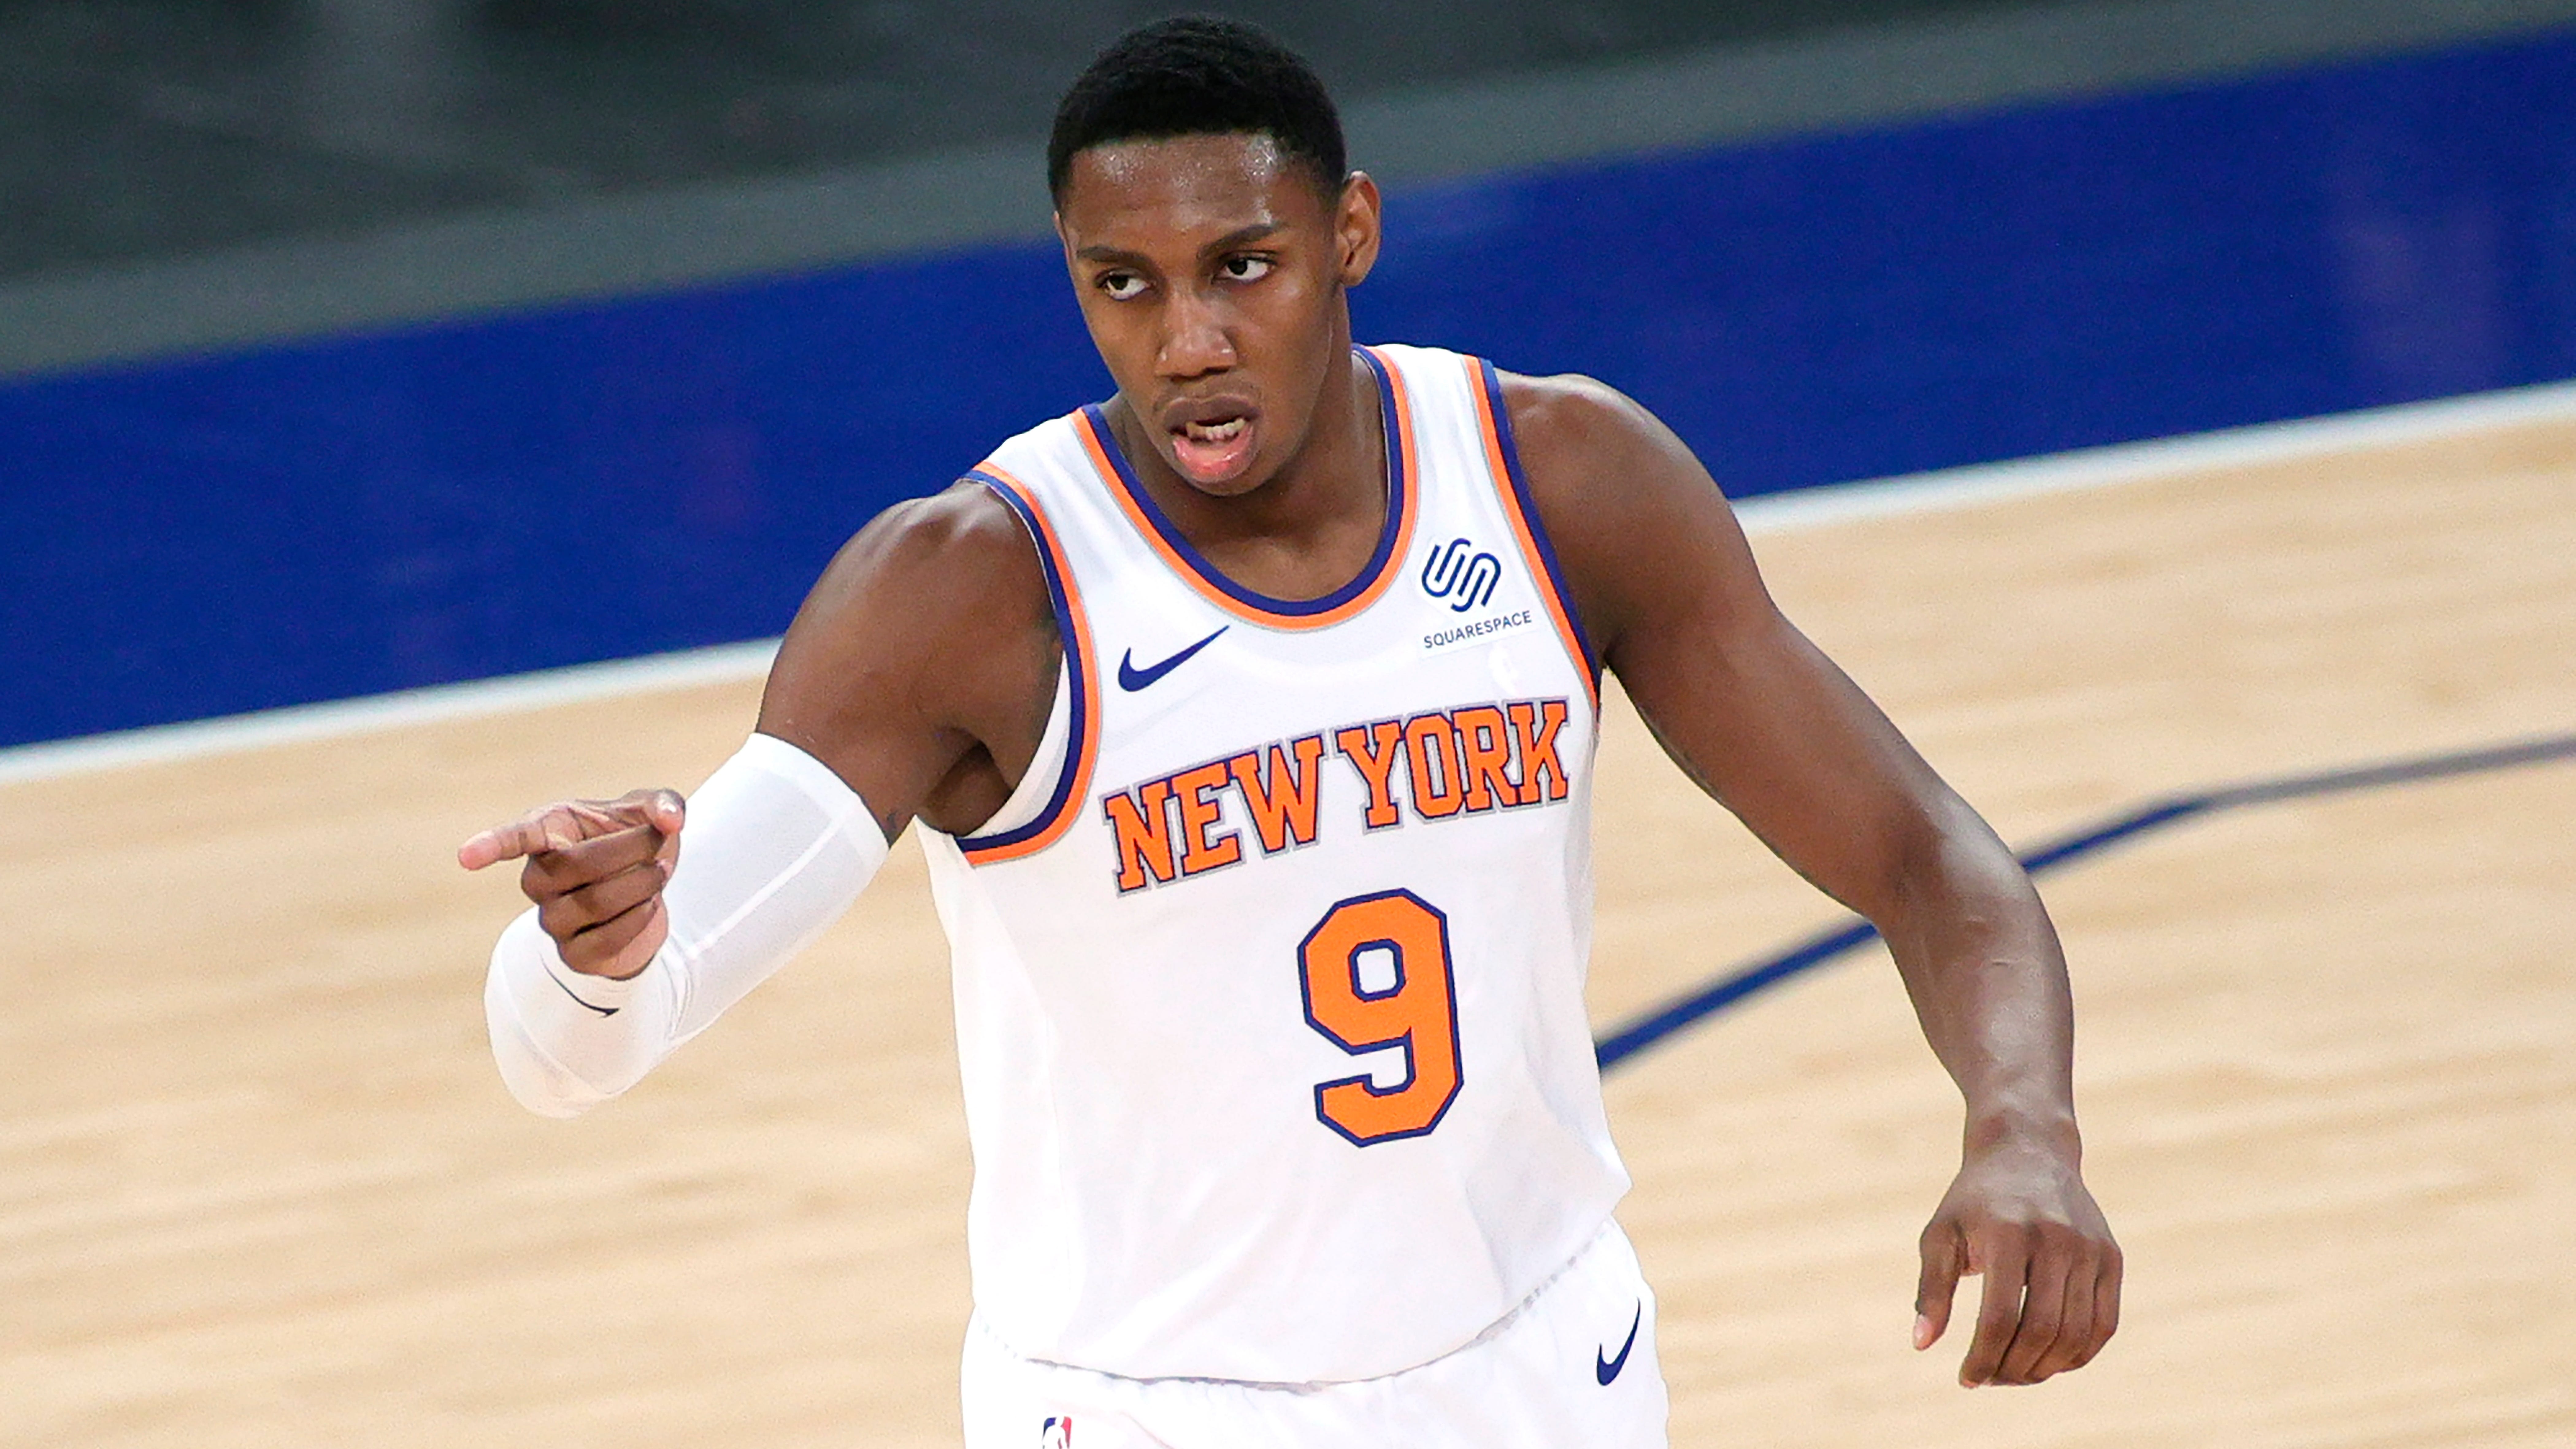 R.J. Barrett and the Knicks are riding the longest active win streak in the NBA.